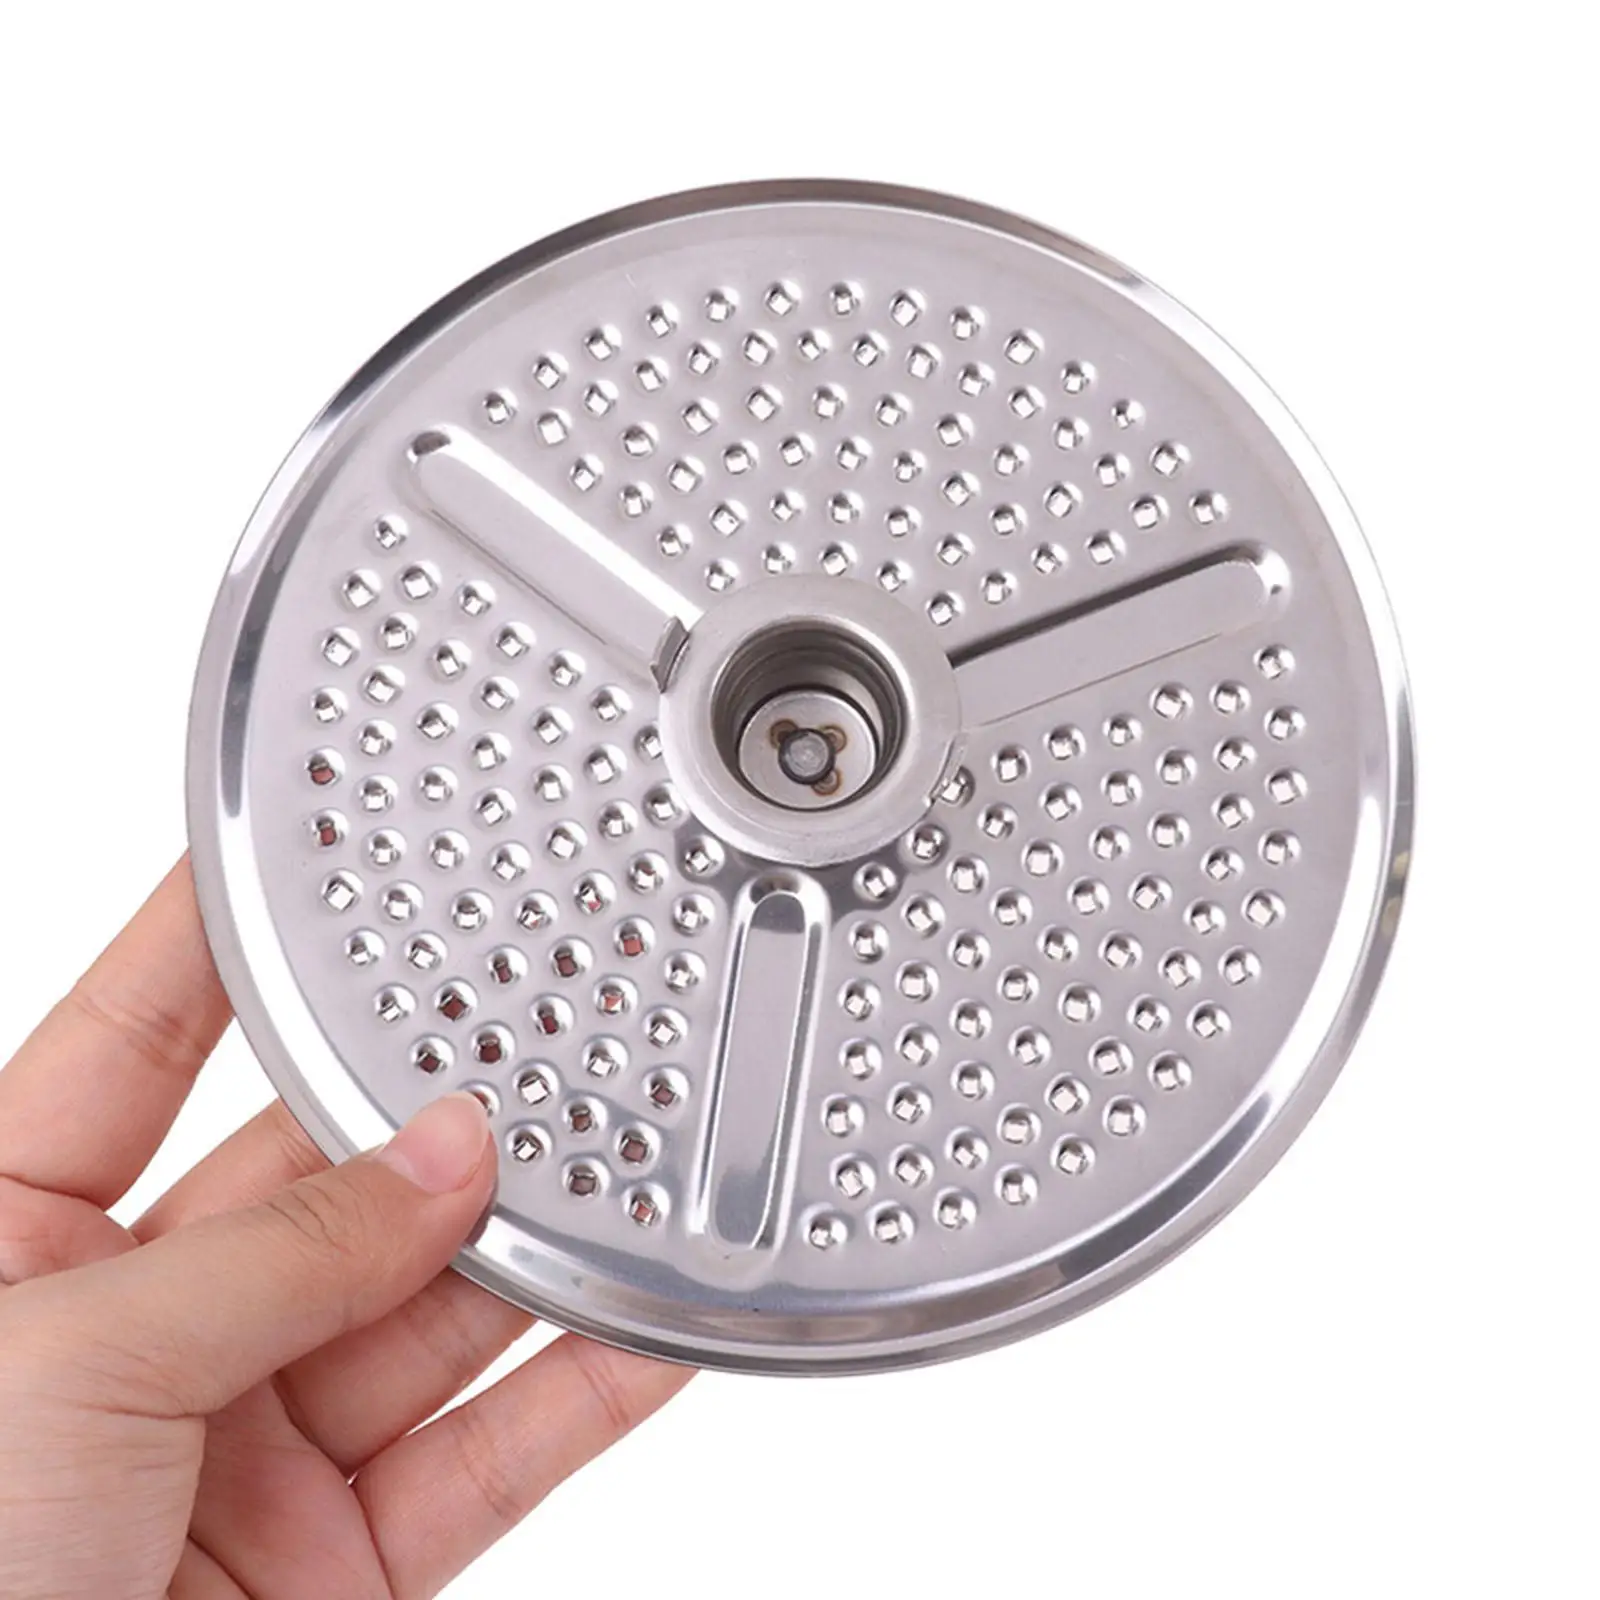 Food Processor Masher disc Replacement Accessories Kitchen Appliances Sturdy Peeling Disc for TM5 Blender Juicer